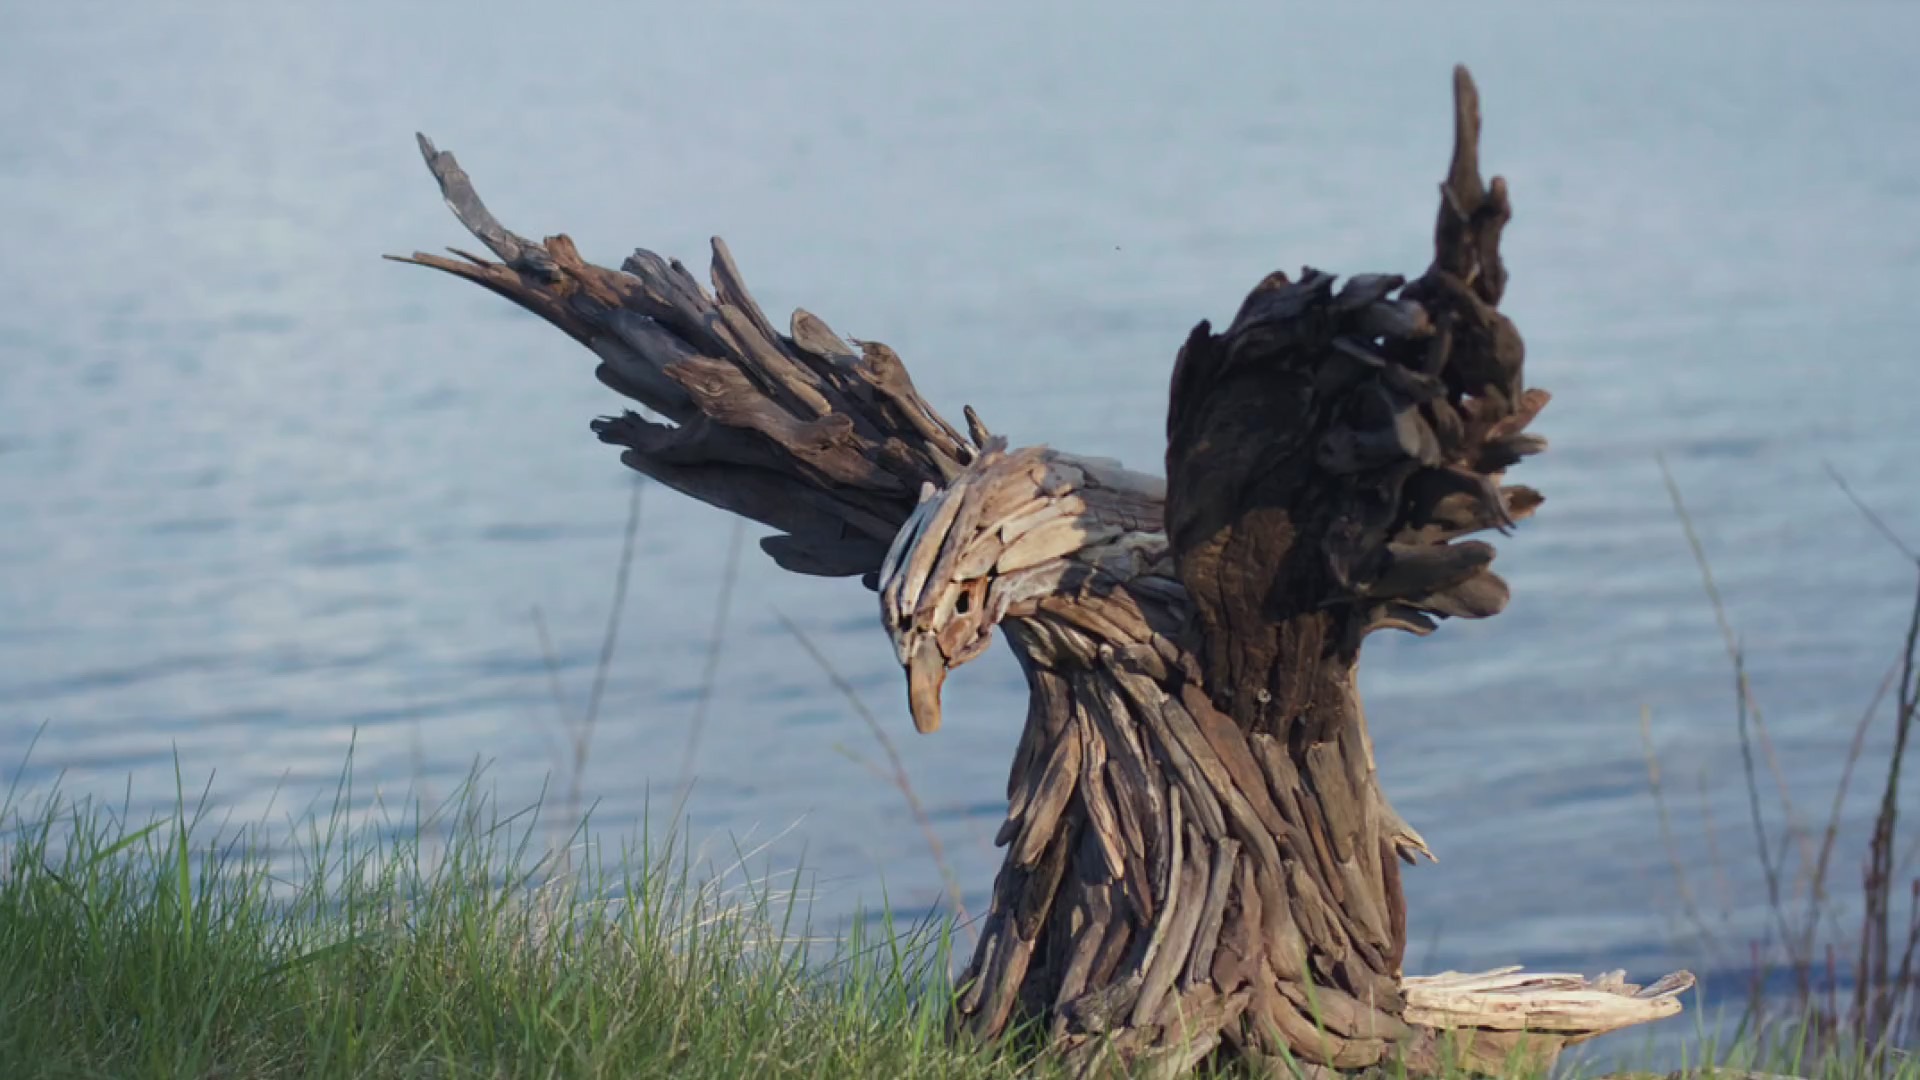 ‘I’m Super Thankful That I Can Create’: Moose Lake Artist Crafts Driftwood Sculptures